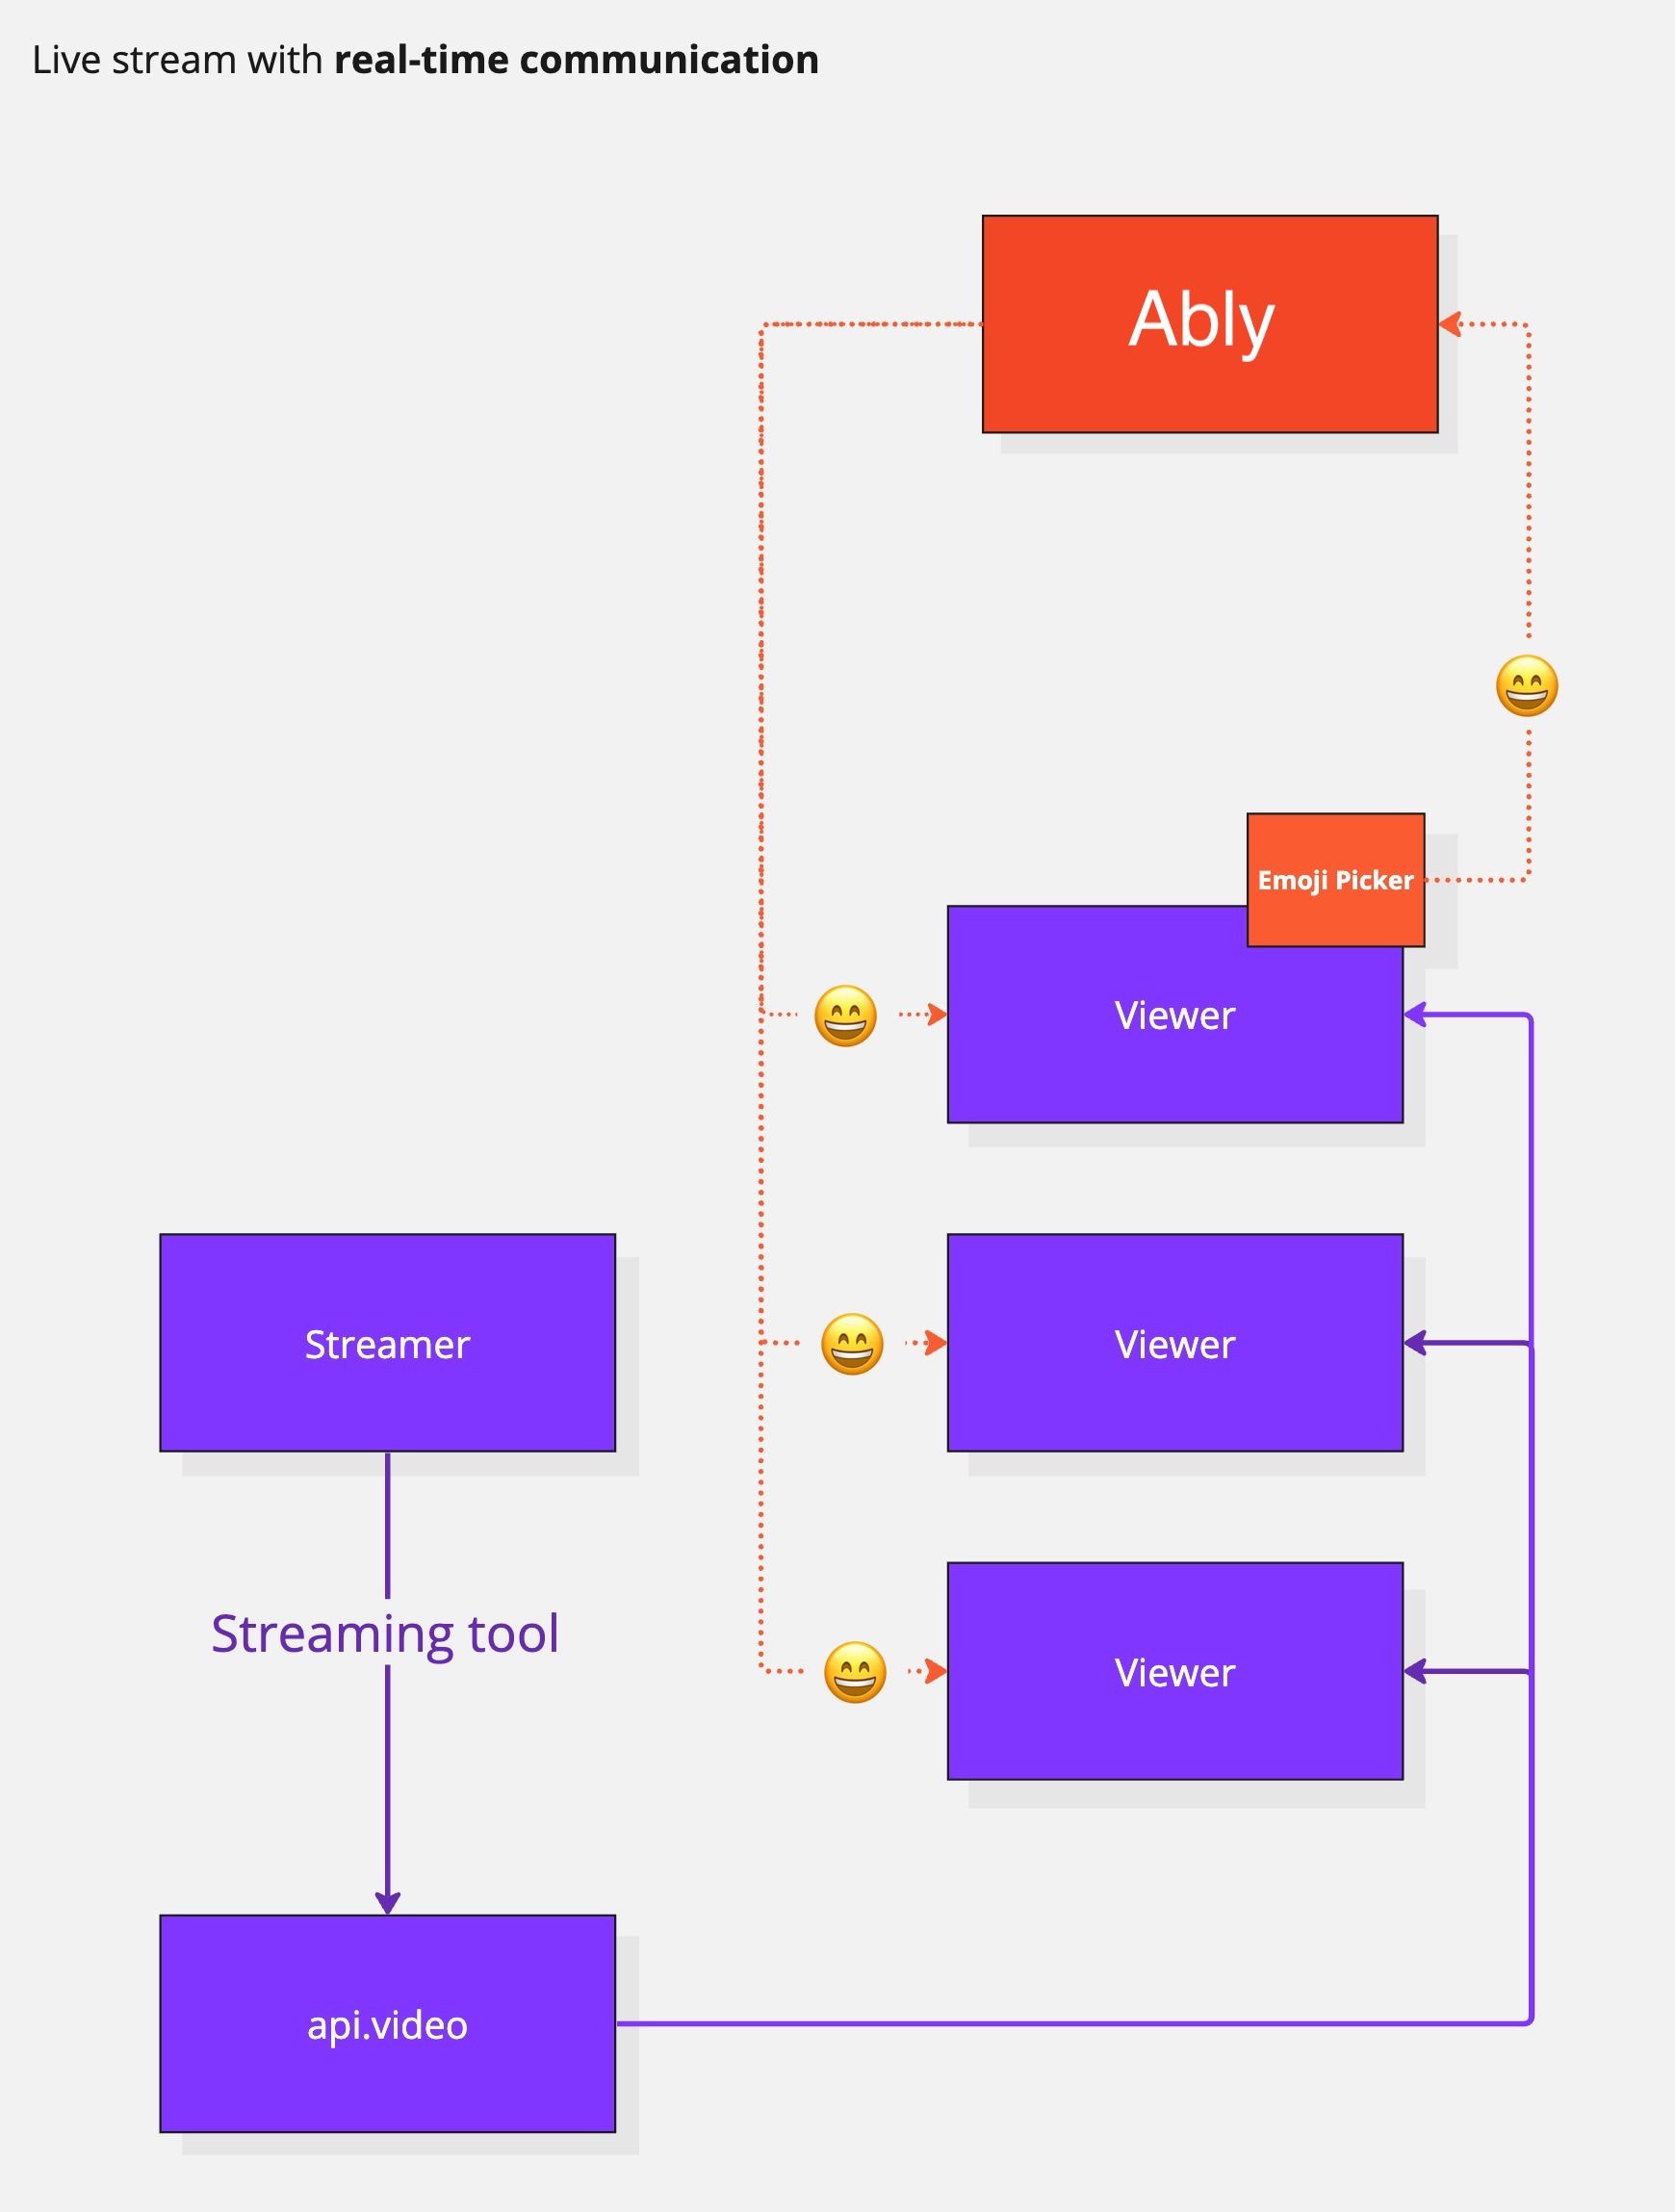 livestream-with-realtime-communication-diagram-ably